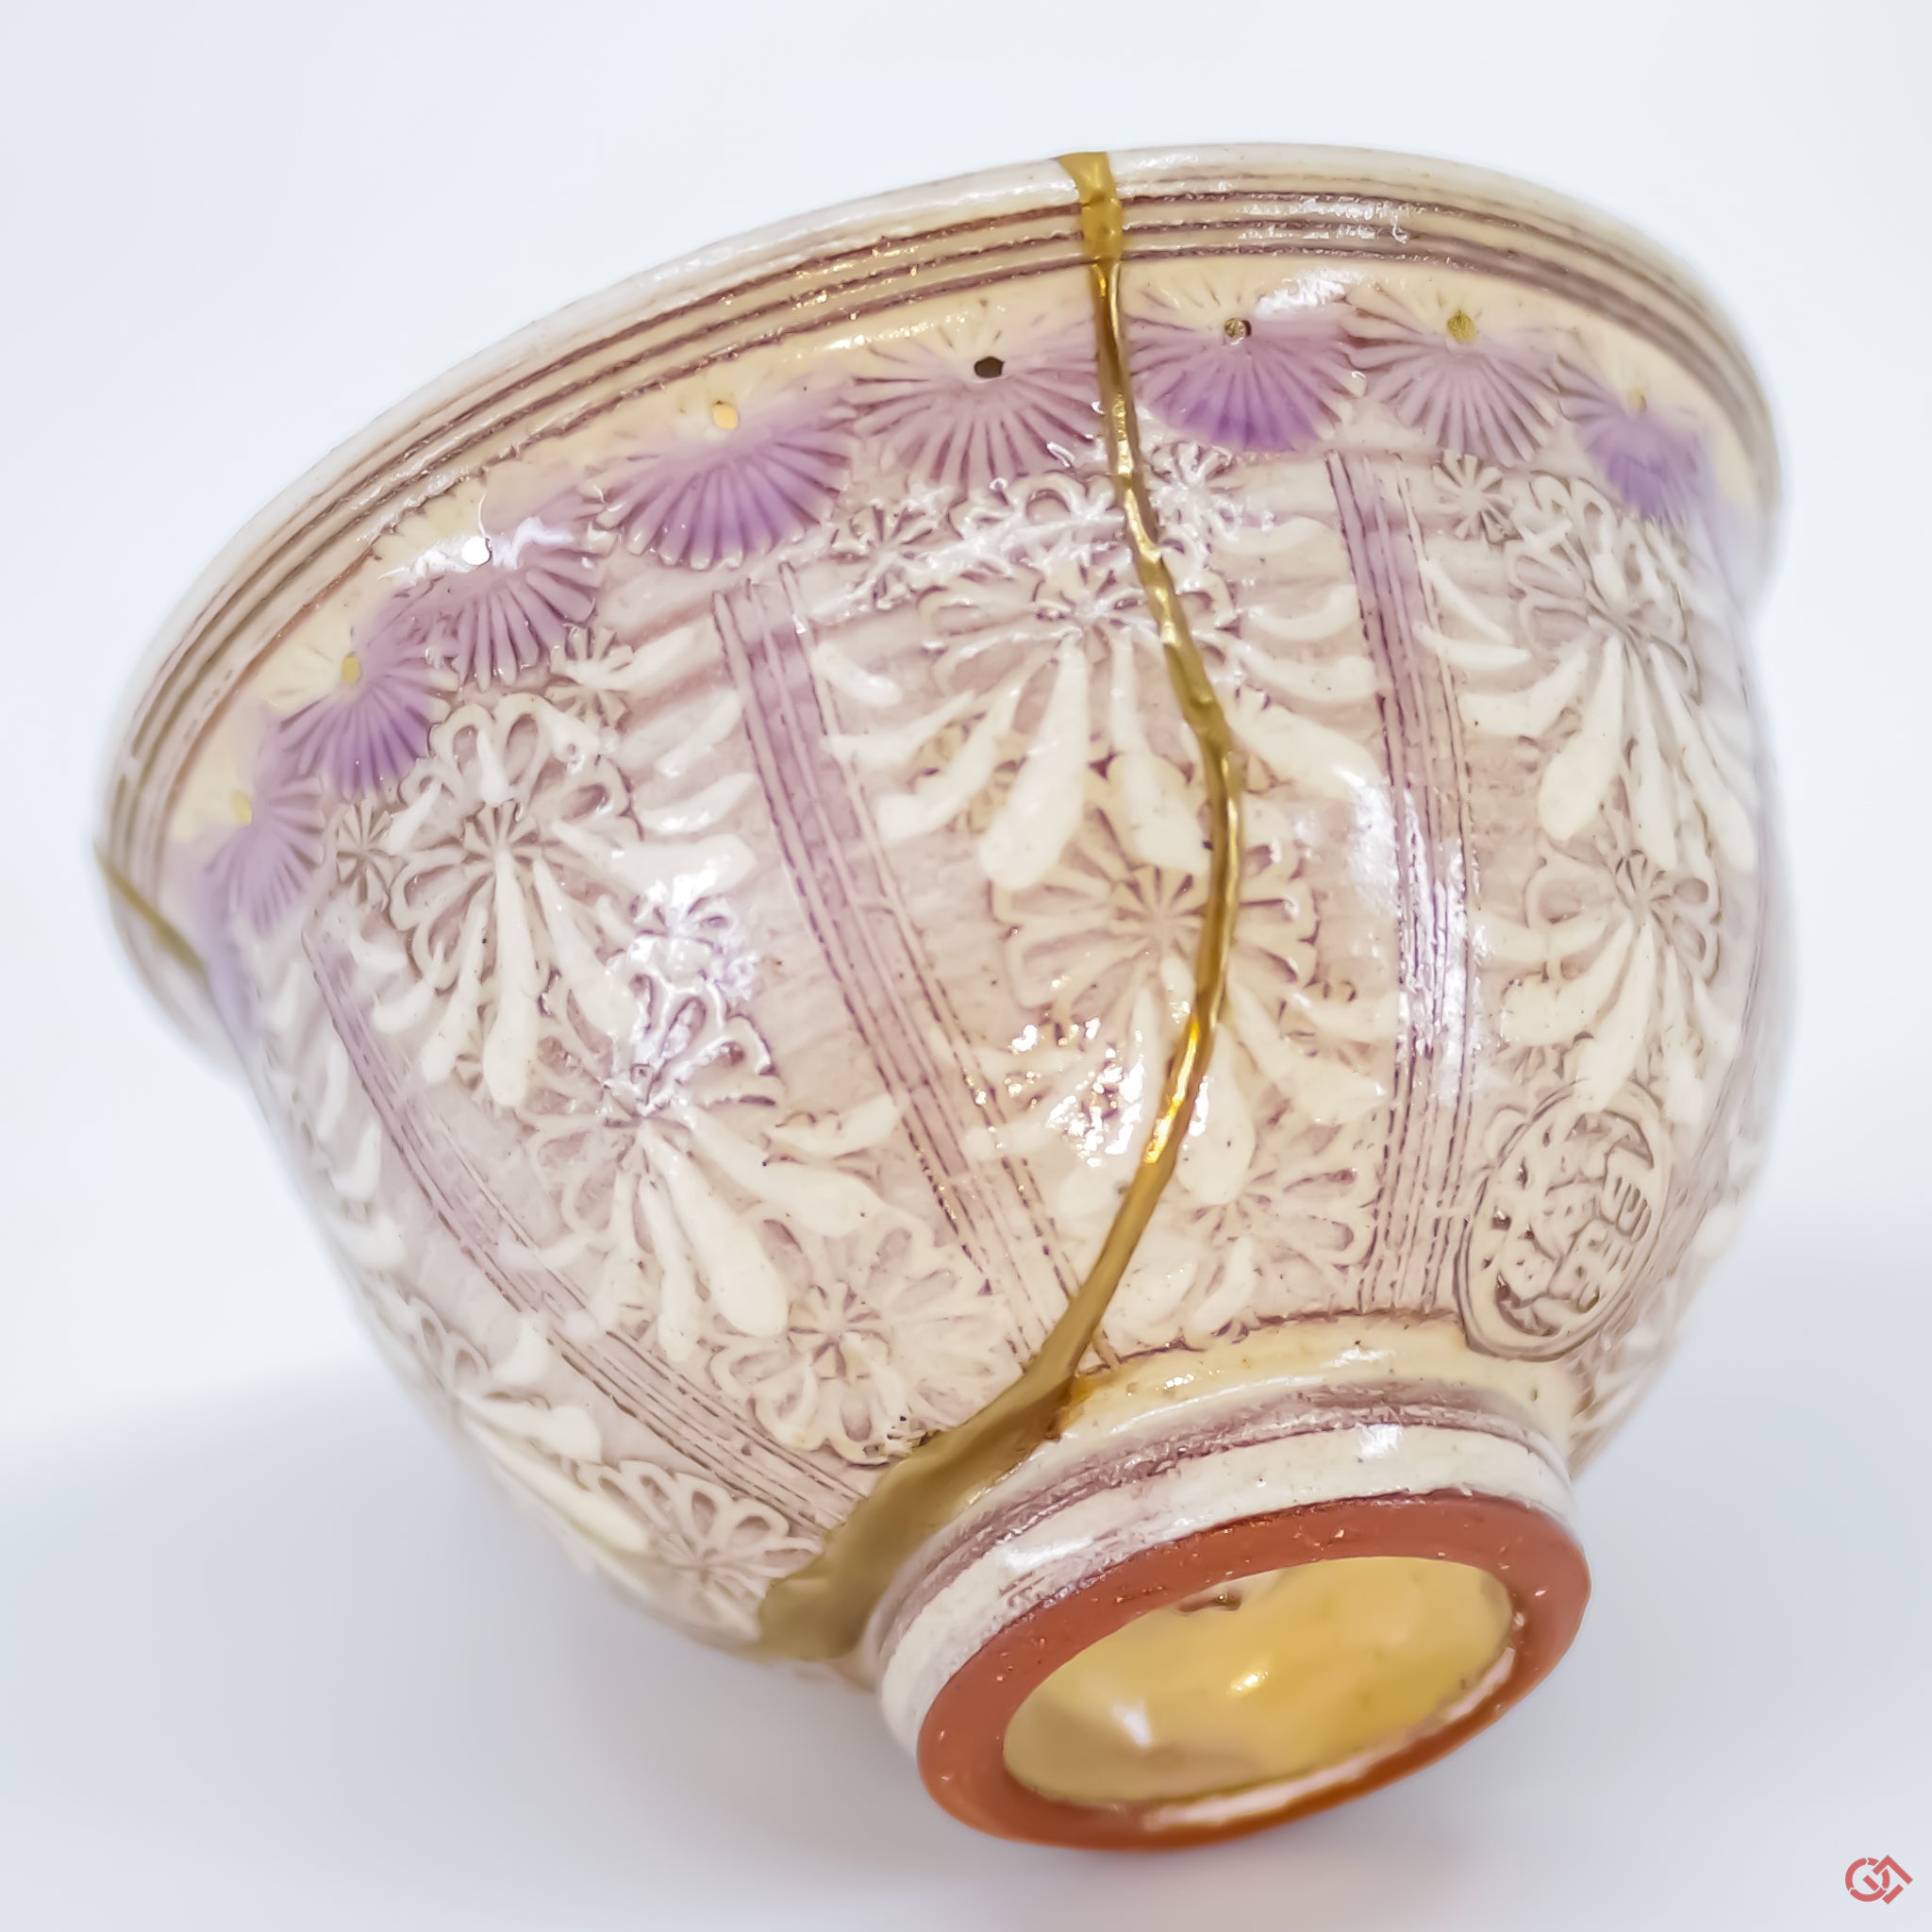 Close-up photo of an authentic Kintsugi pottery piece, showing the detail of its repairs and craftsmanship